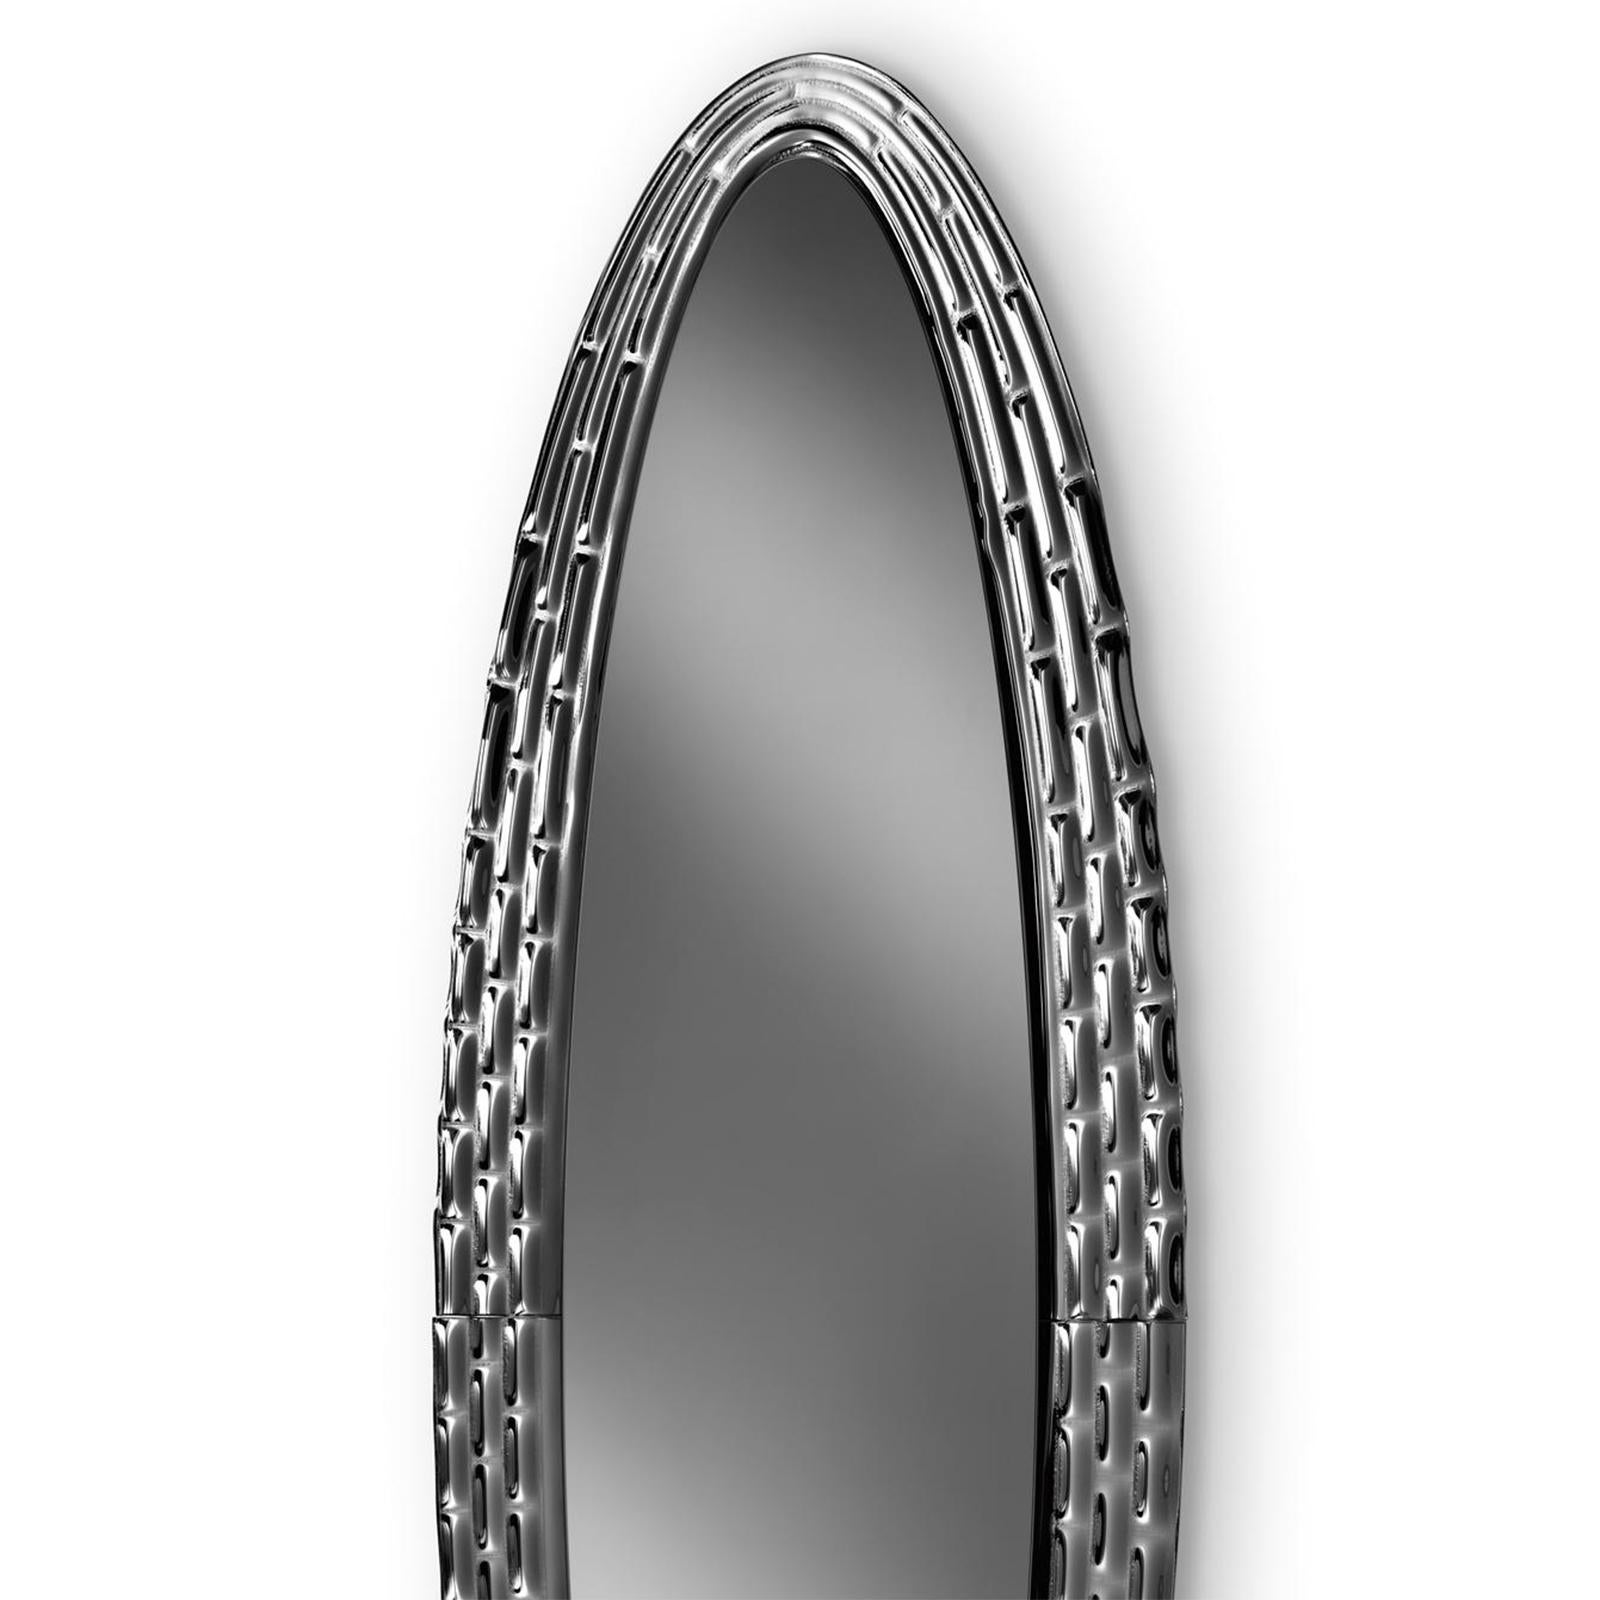 Mirror black manor oval in fused glass 6mm
thickness with back-silvered frame. With flat mirror in
smoked finish 5mm thickness.
Also available in bronze finish.